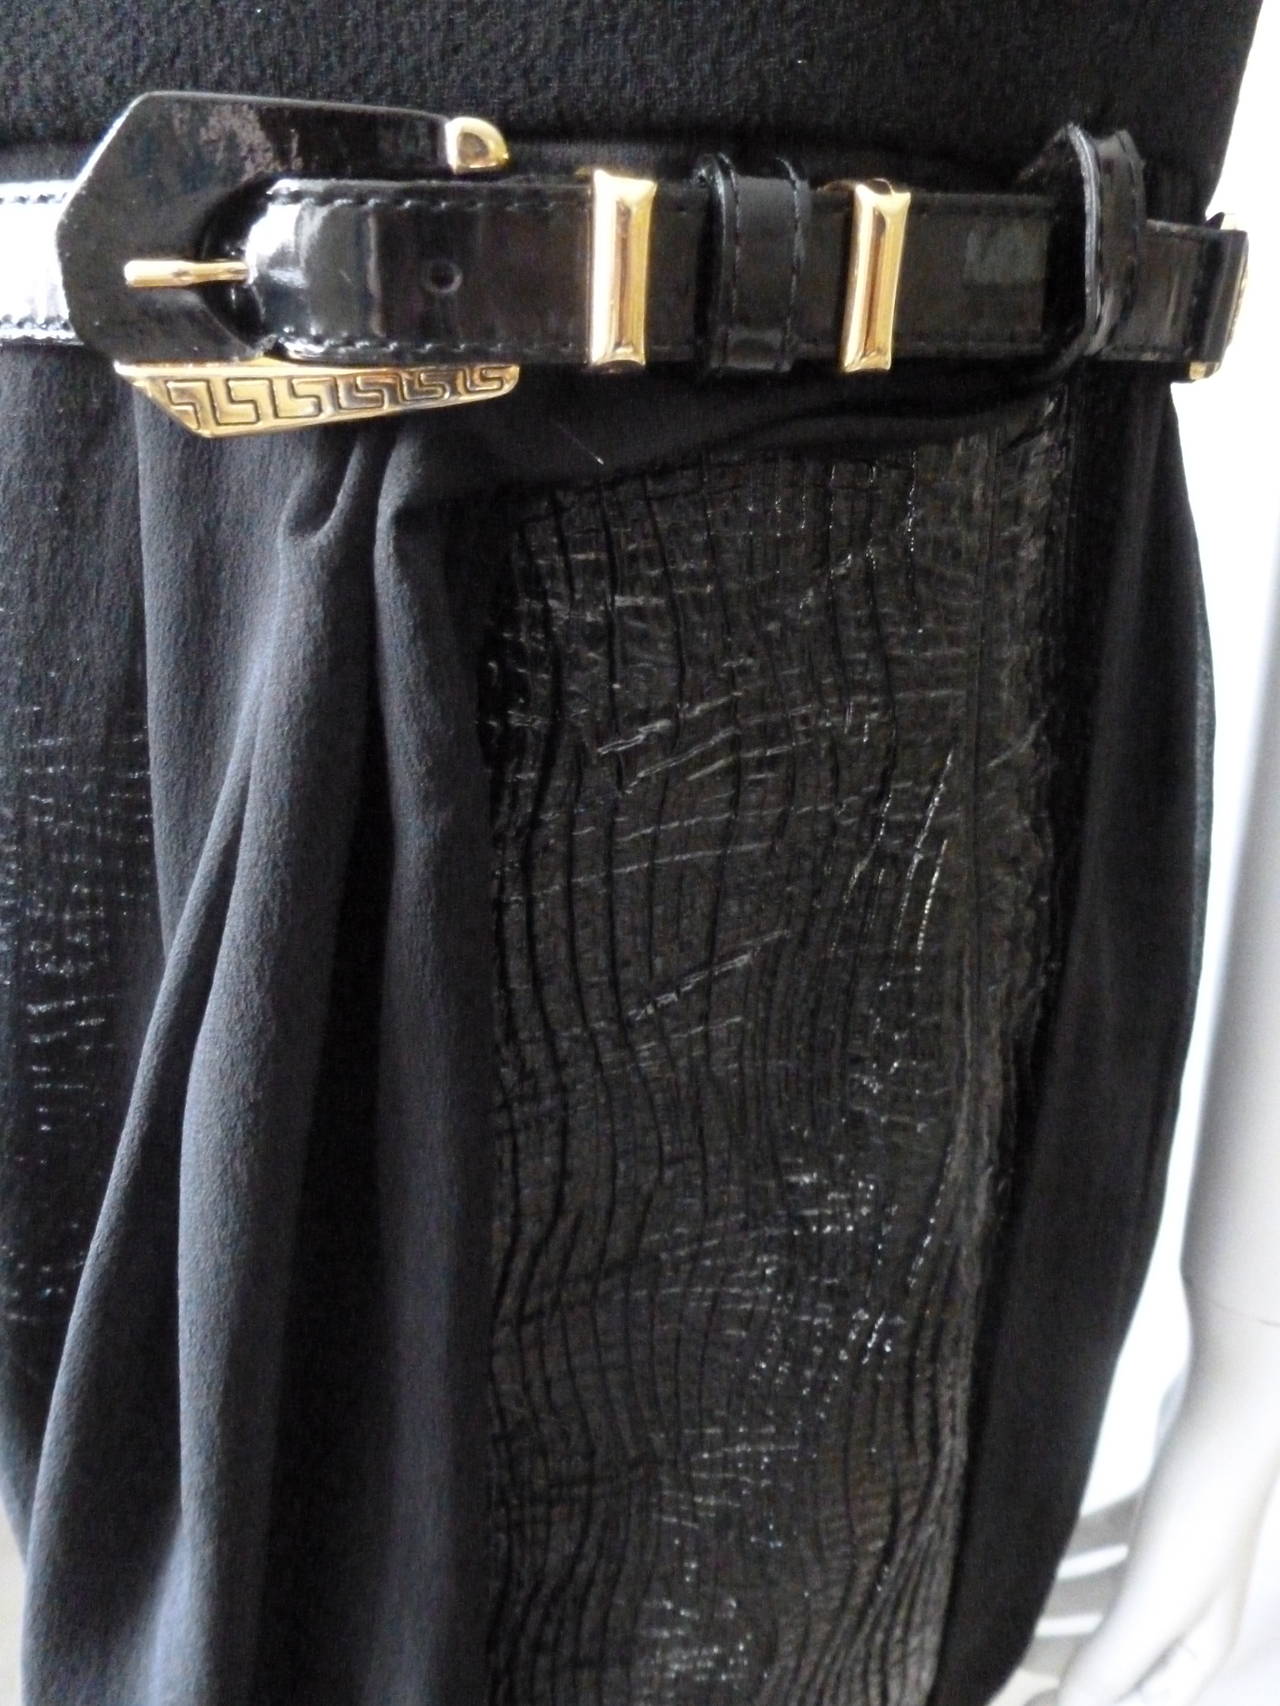 Iconic and rare Gianni Versace Couture black crocodile effect patent leather, with silk chiffon overlay Empire silhouette sleeveless dress from the Fall 1994 collection. The dress features a wool crepe bodice and a patent leather and gold-tone metal